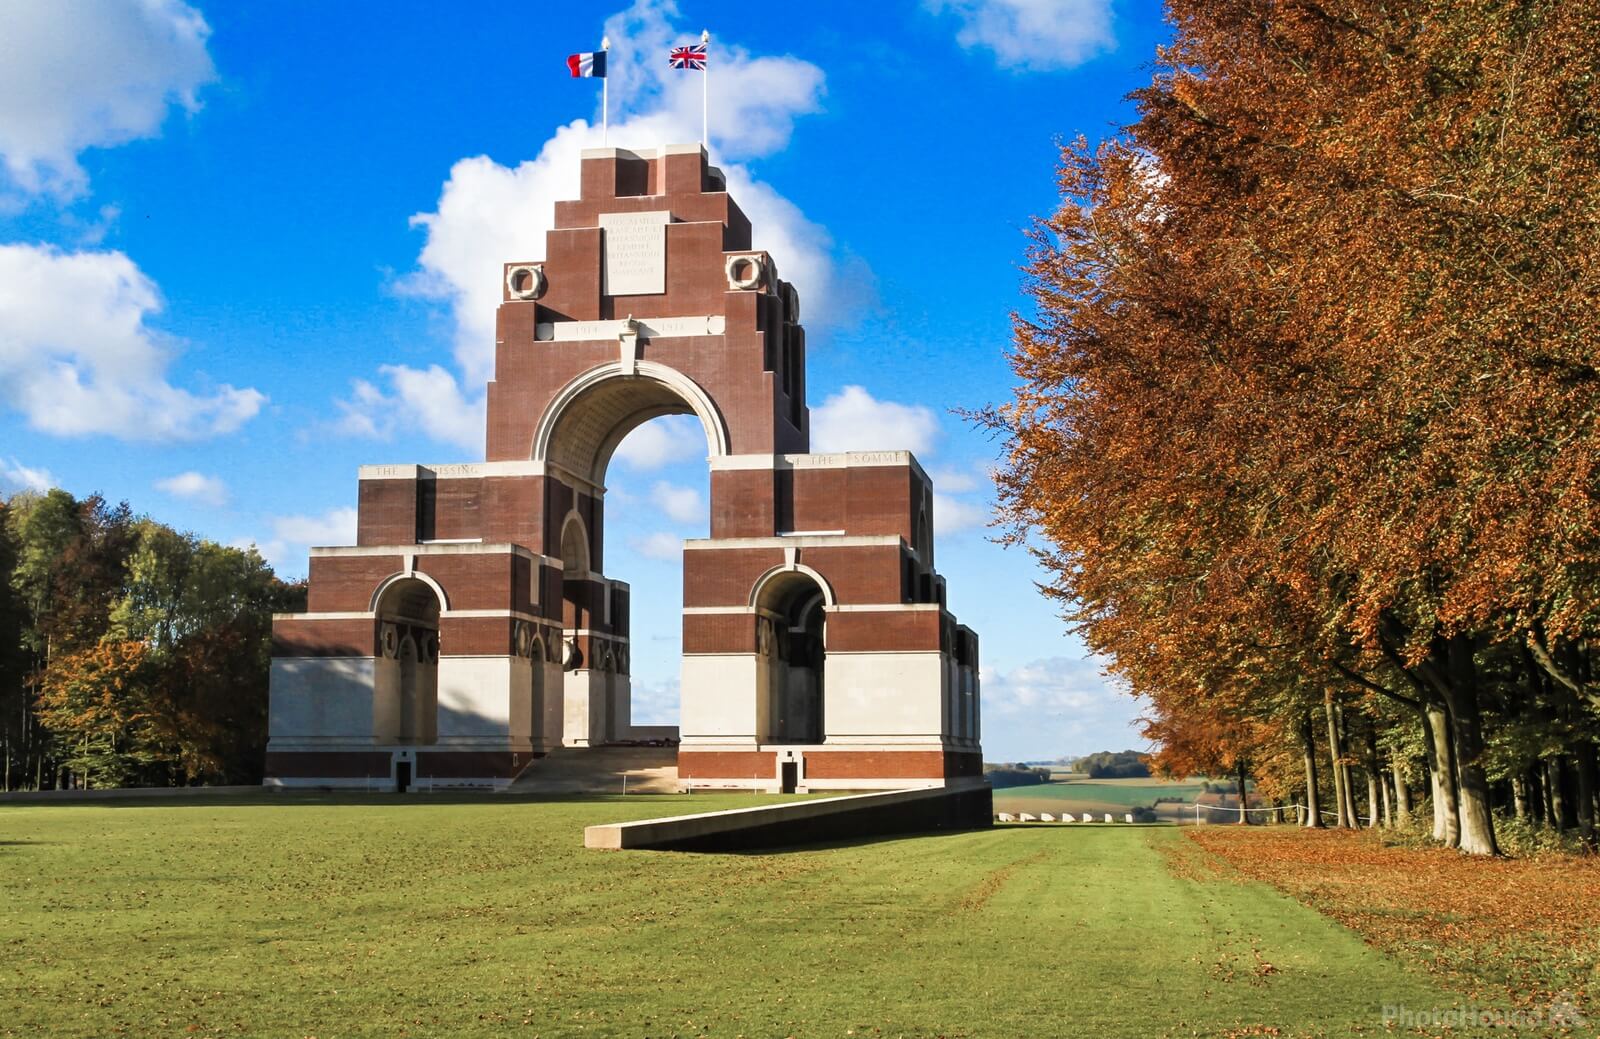 Image of Thiepval Memorial to the Missing by Steven Cottam